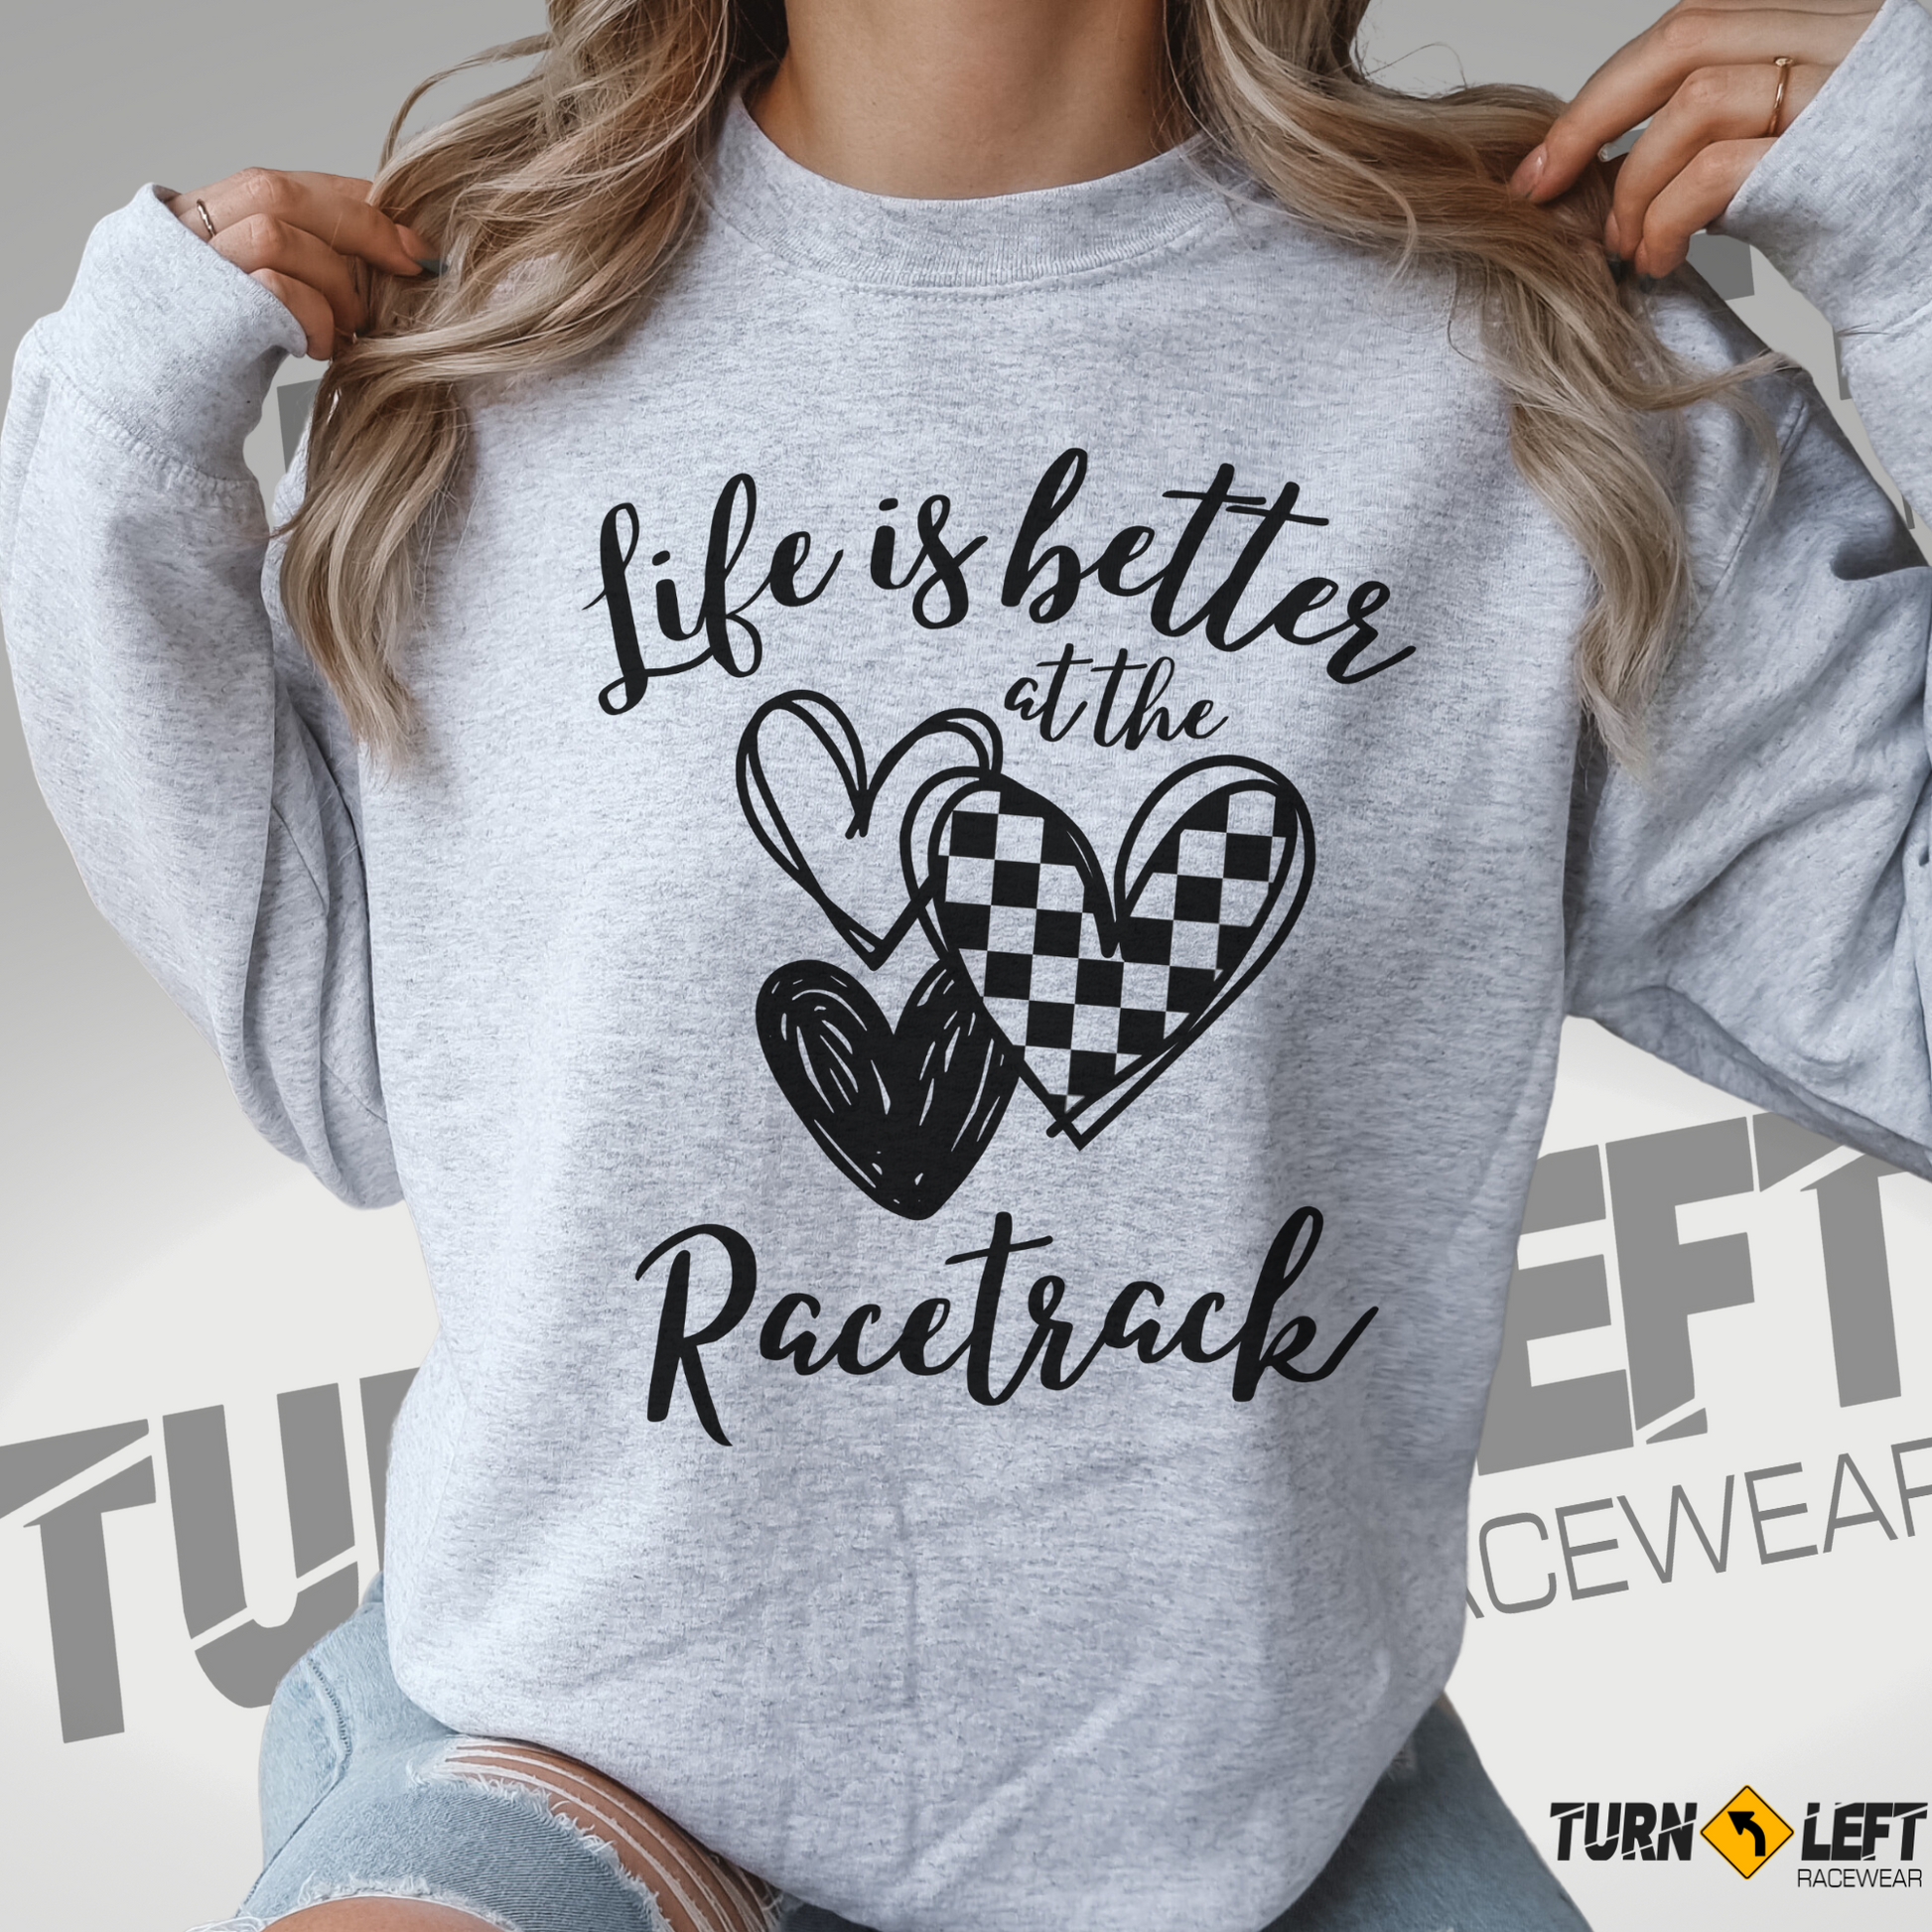 Racing Quote Sweatshirts. Life Is Better At The Racetrack. Women's Checker Flag Shirts. Nascar Racing Sweatshirts. Checker Heart Racing Gear for Women